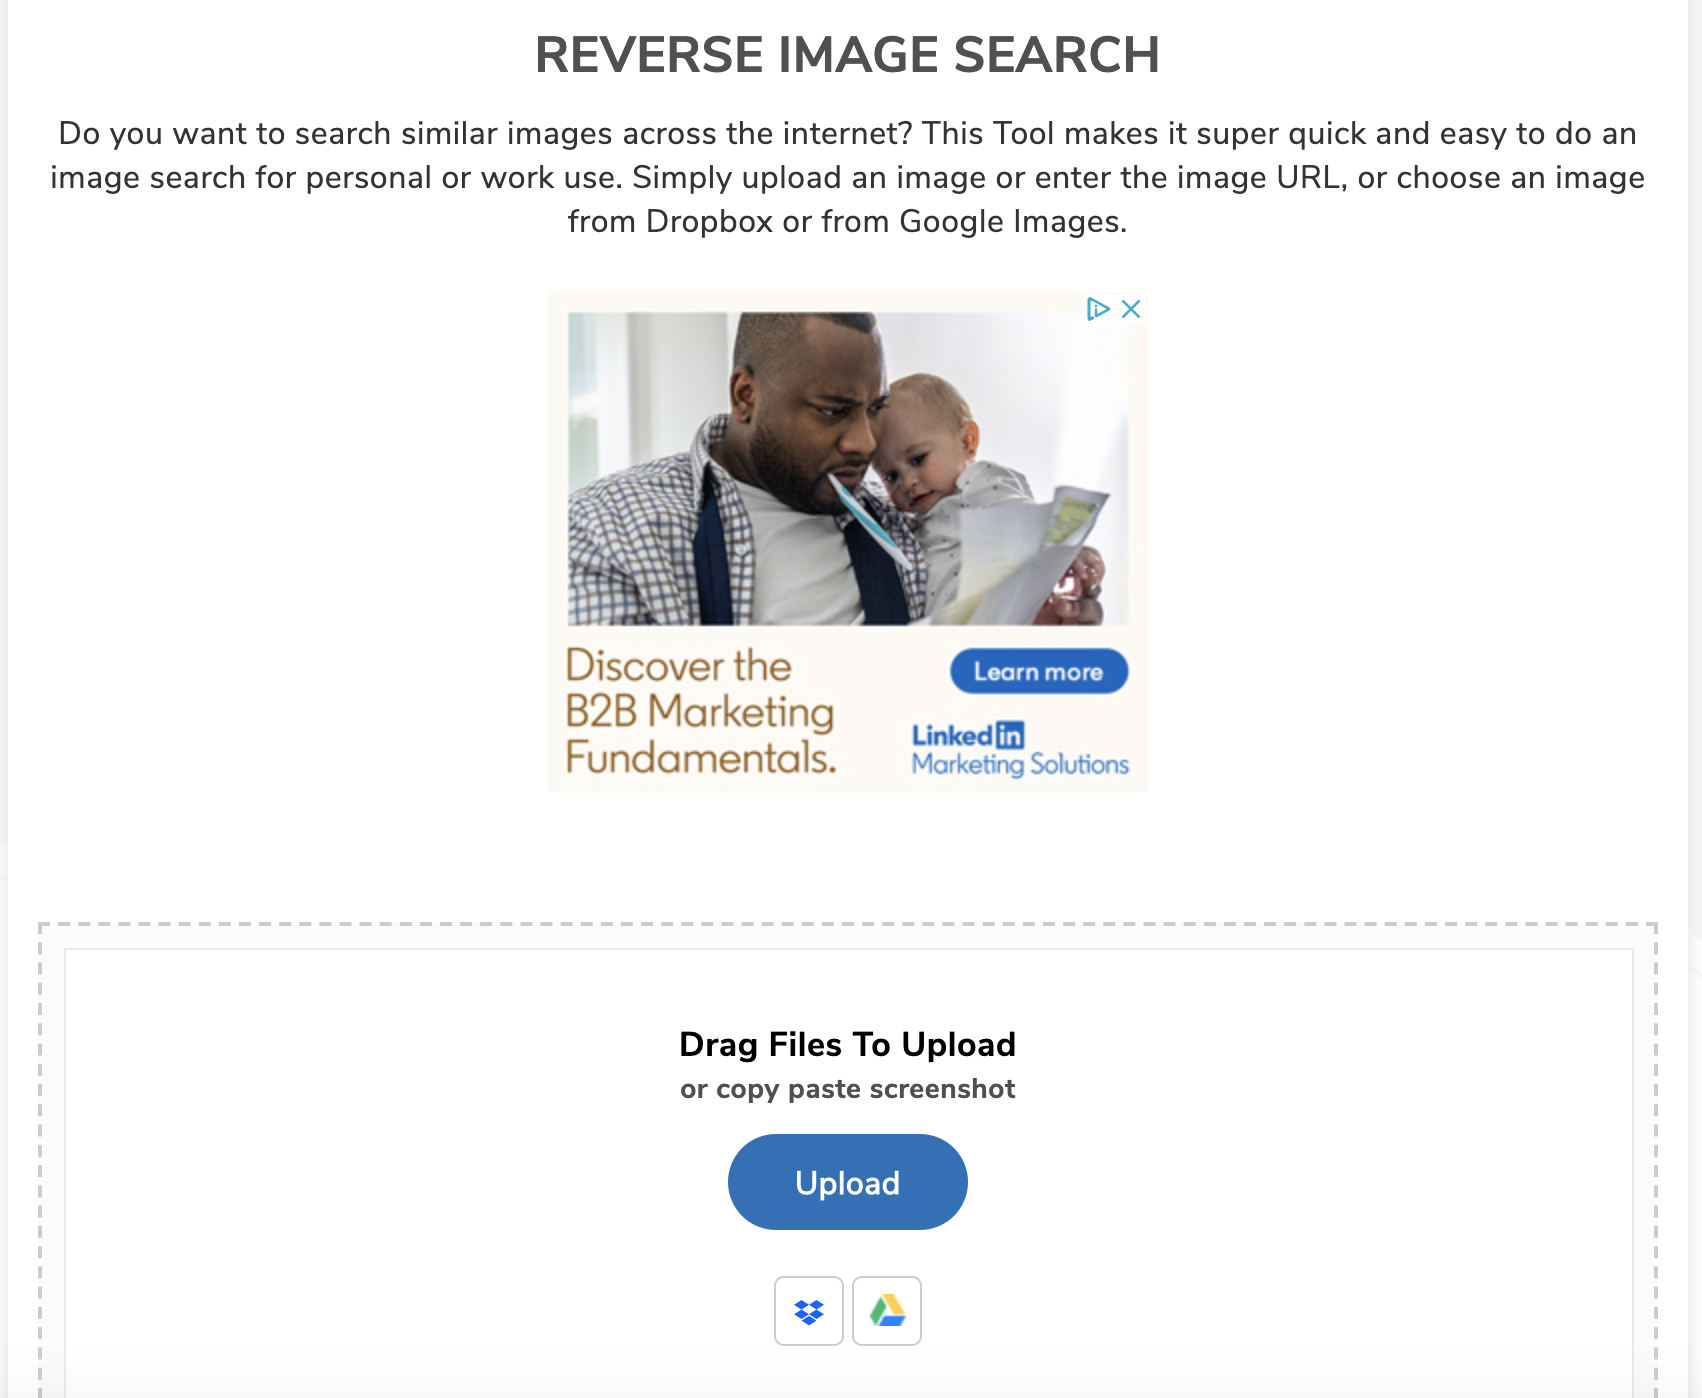 How To Do A Reverse Image Search On Both Desktop And Mobile